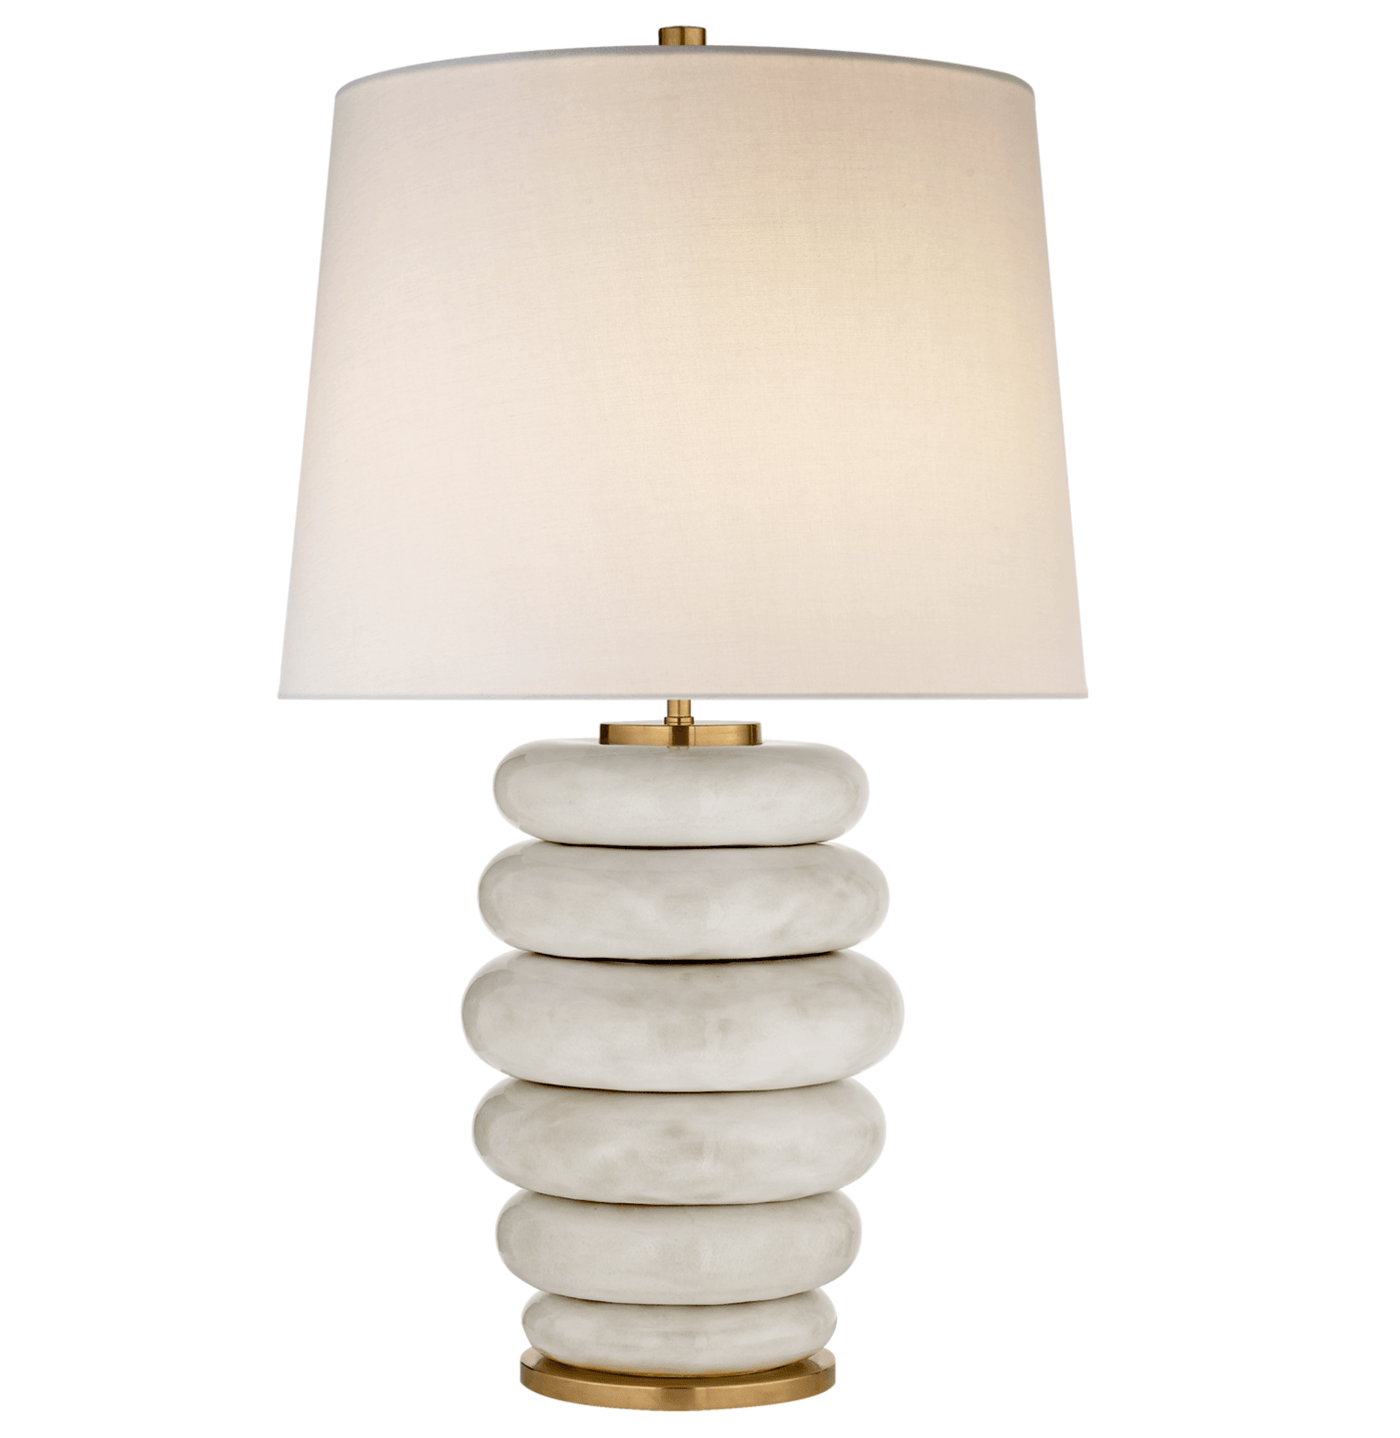 Pheobe Stacked Table Lamp